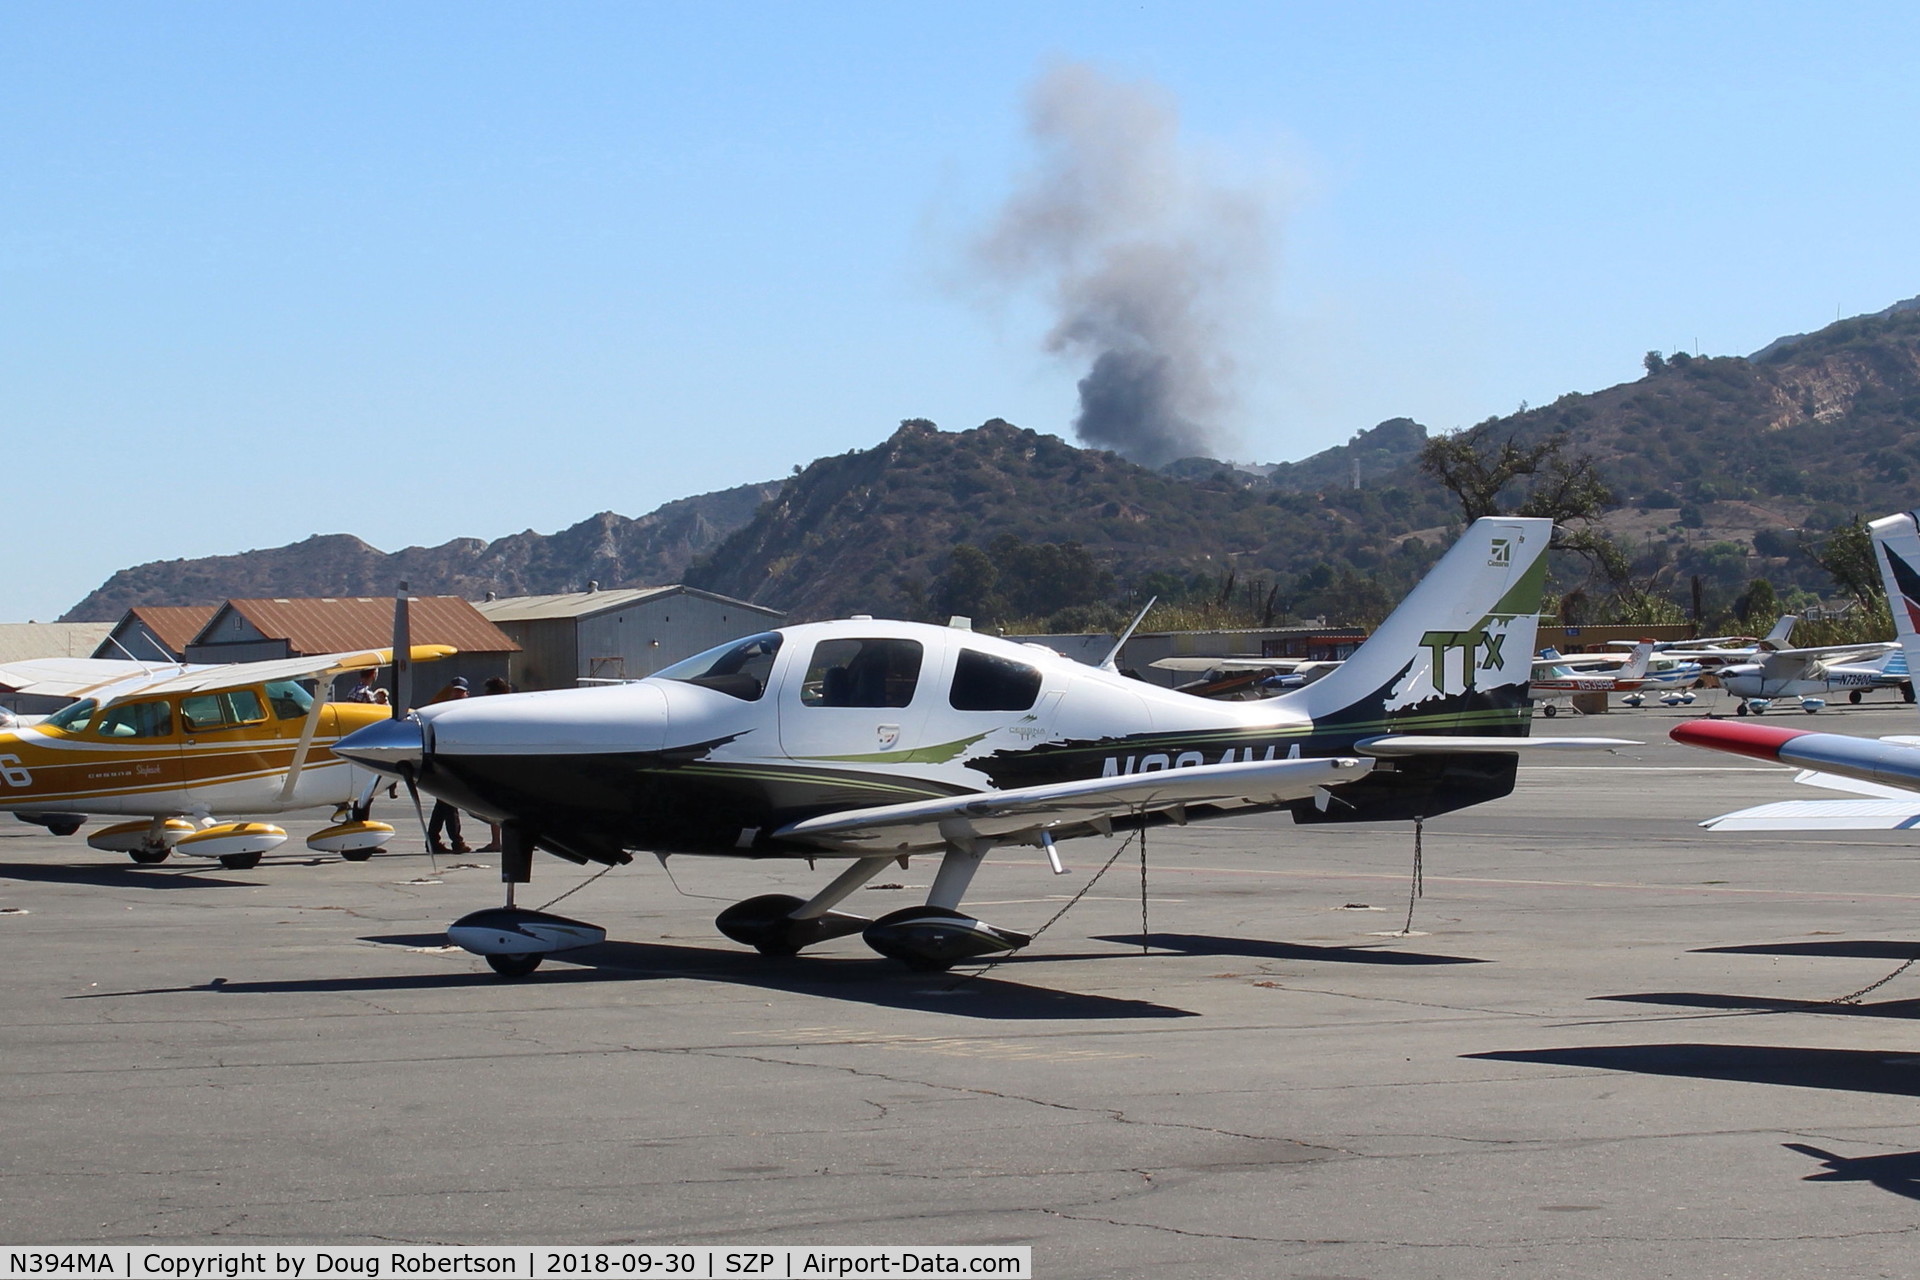 N394MA, 2014 Cessna TTx T240 C/N T24002034, 2014 Cessna TTx T240, Continental TSIO-550C 310 Hp at 2,600 rpm, 235 kts, 4 place. New fire in background across the river-South Mountain-Fire Fighting units dispatched